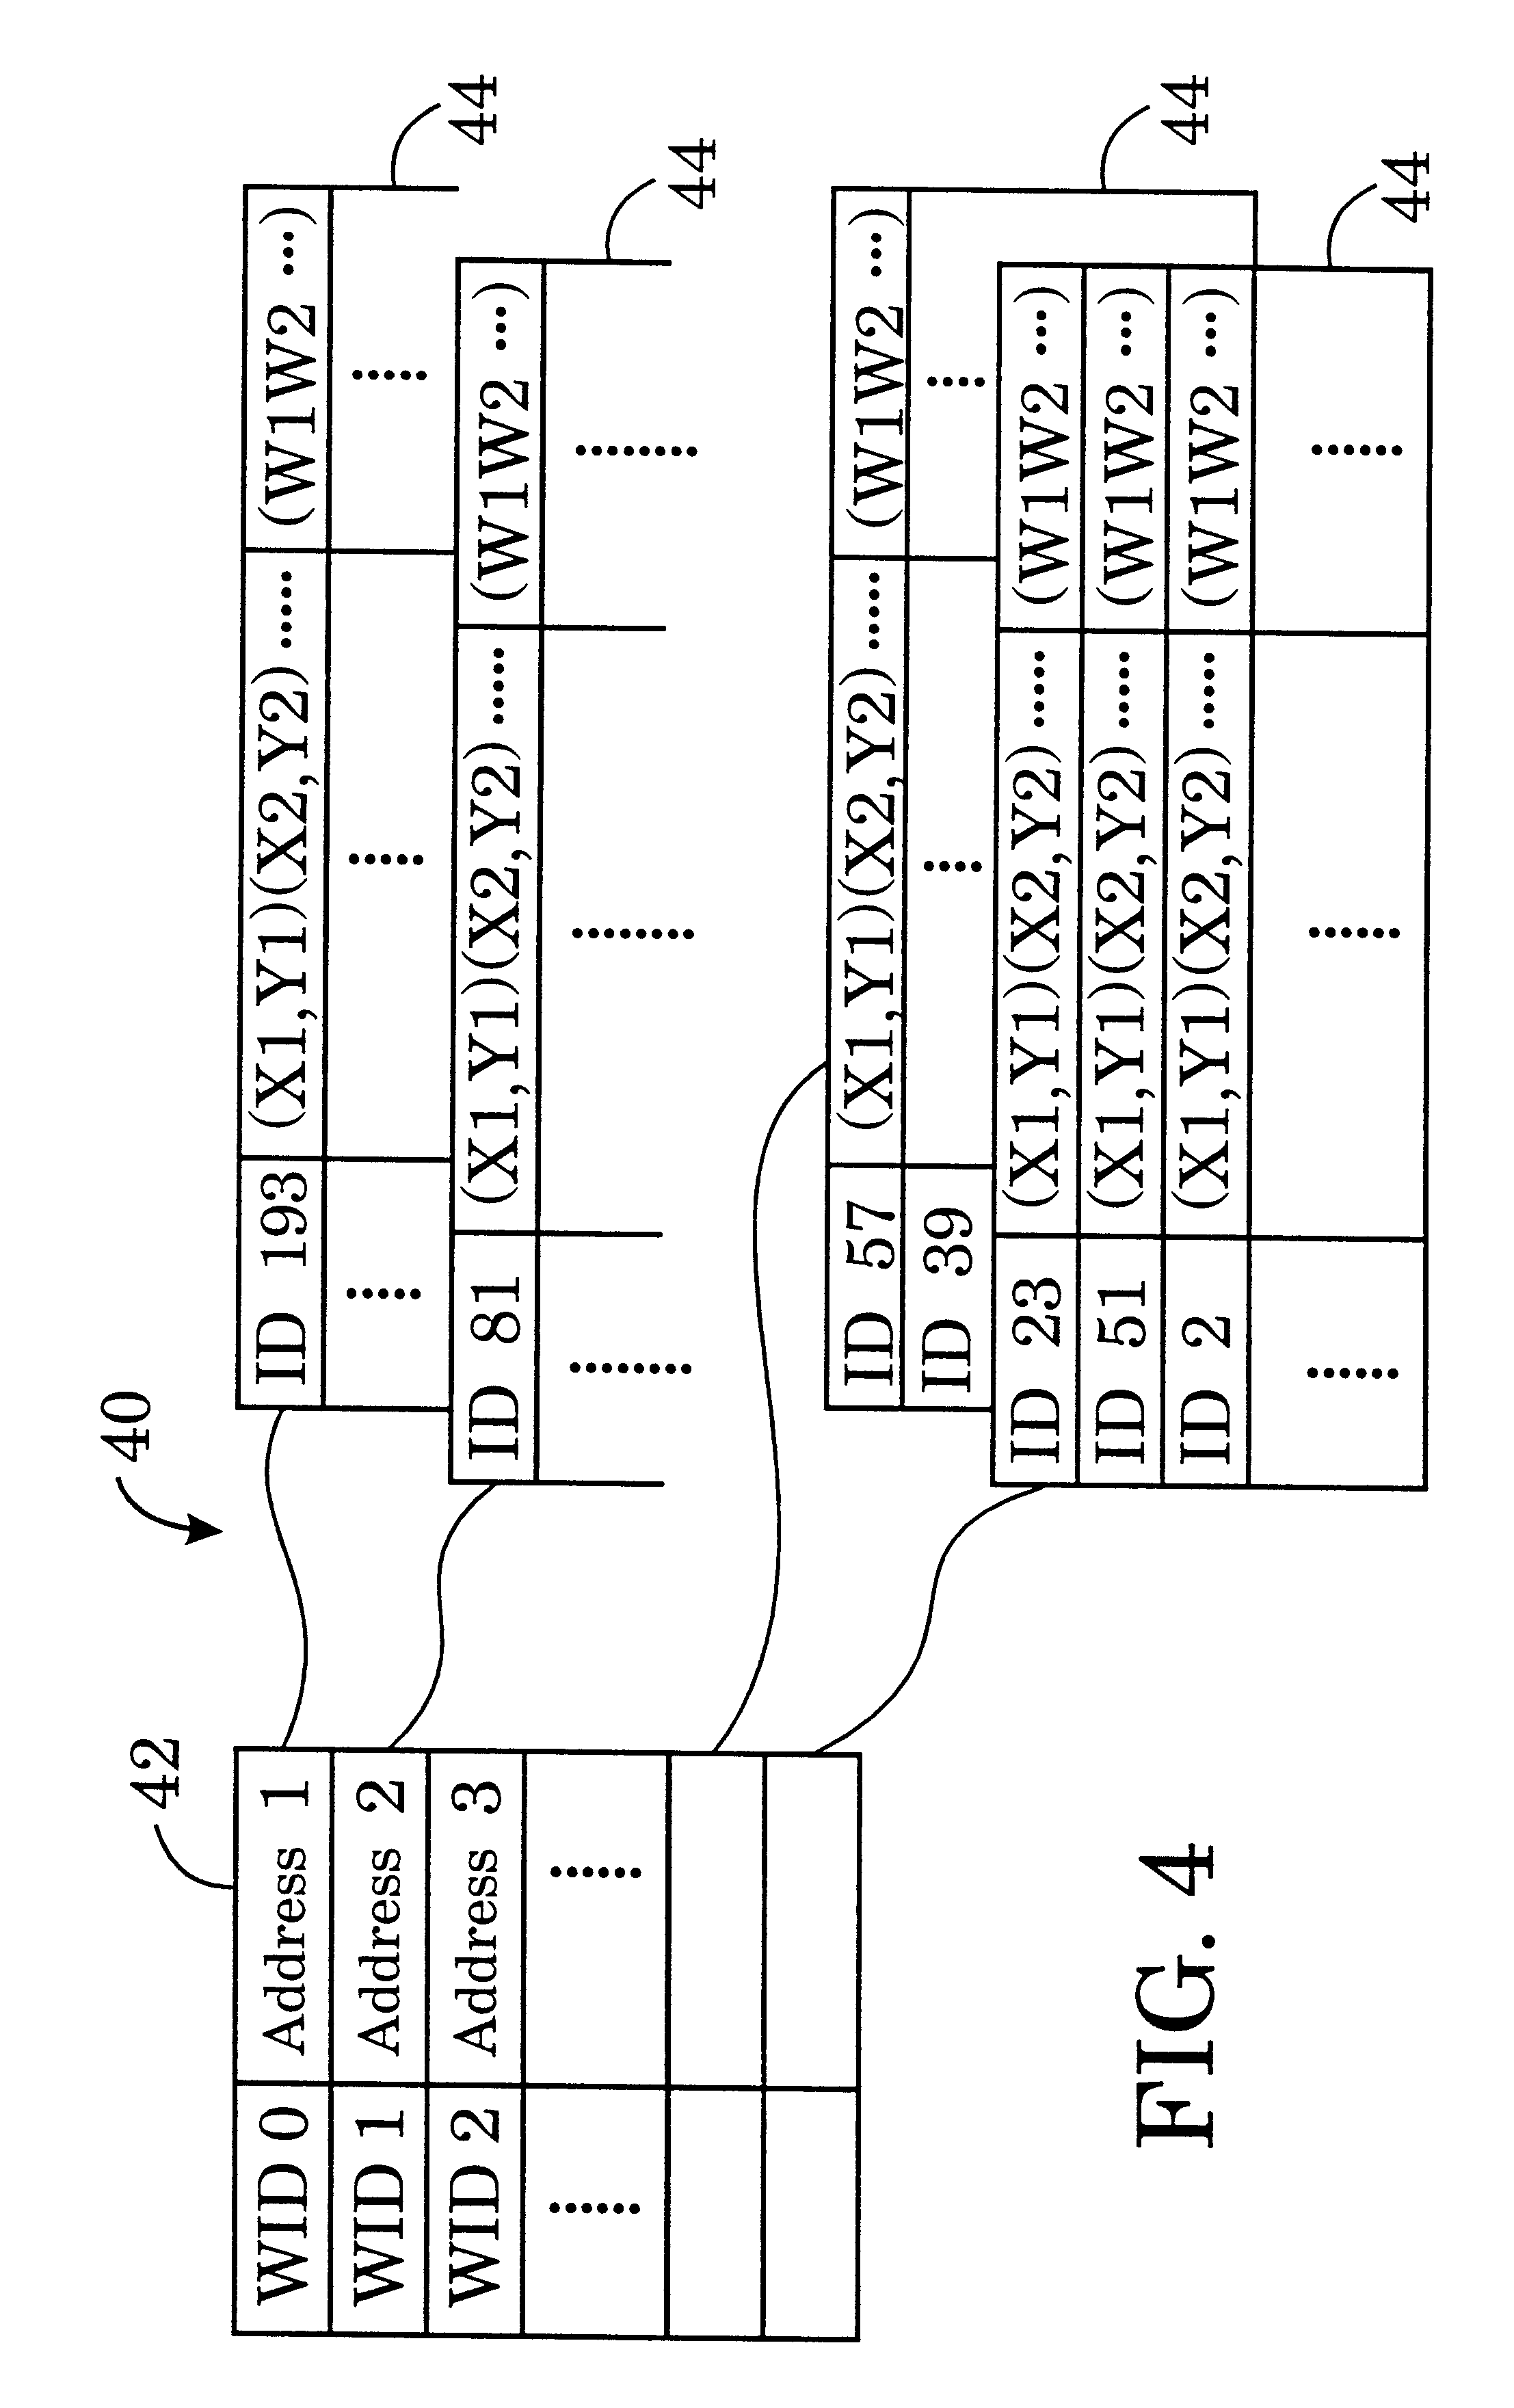 Structural graph display system